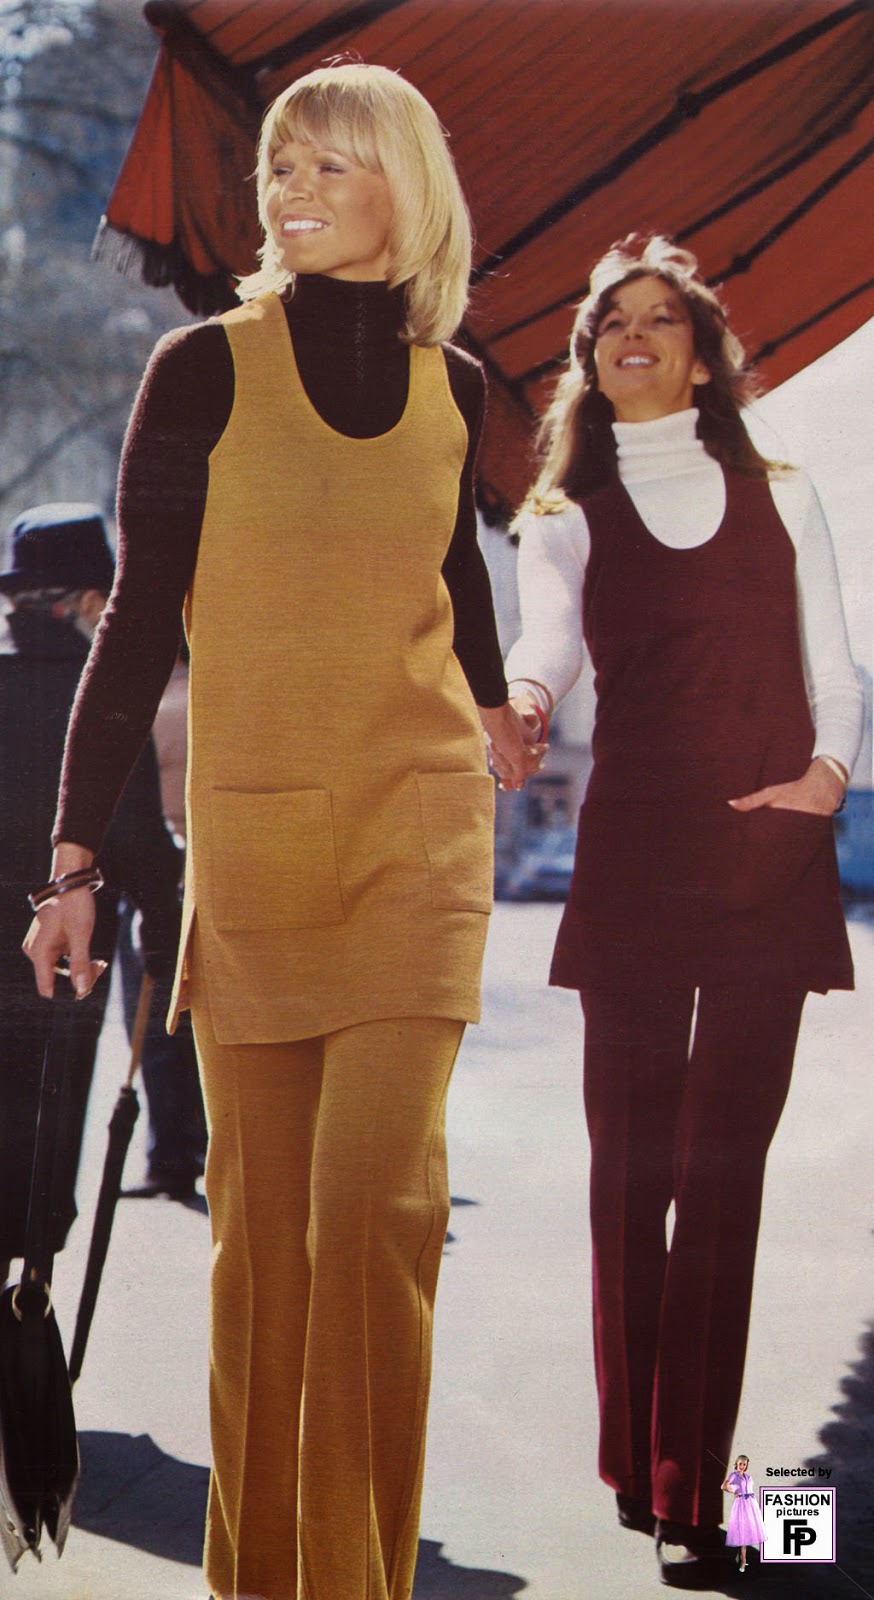 50 Awesome and Colorful Photoshoots of the 1970s Fashion